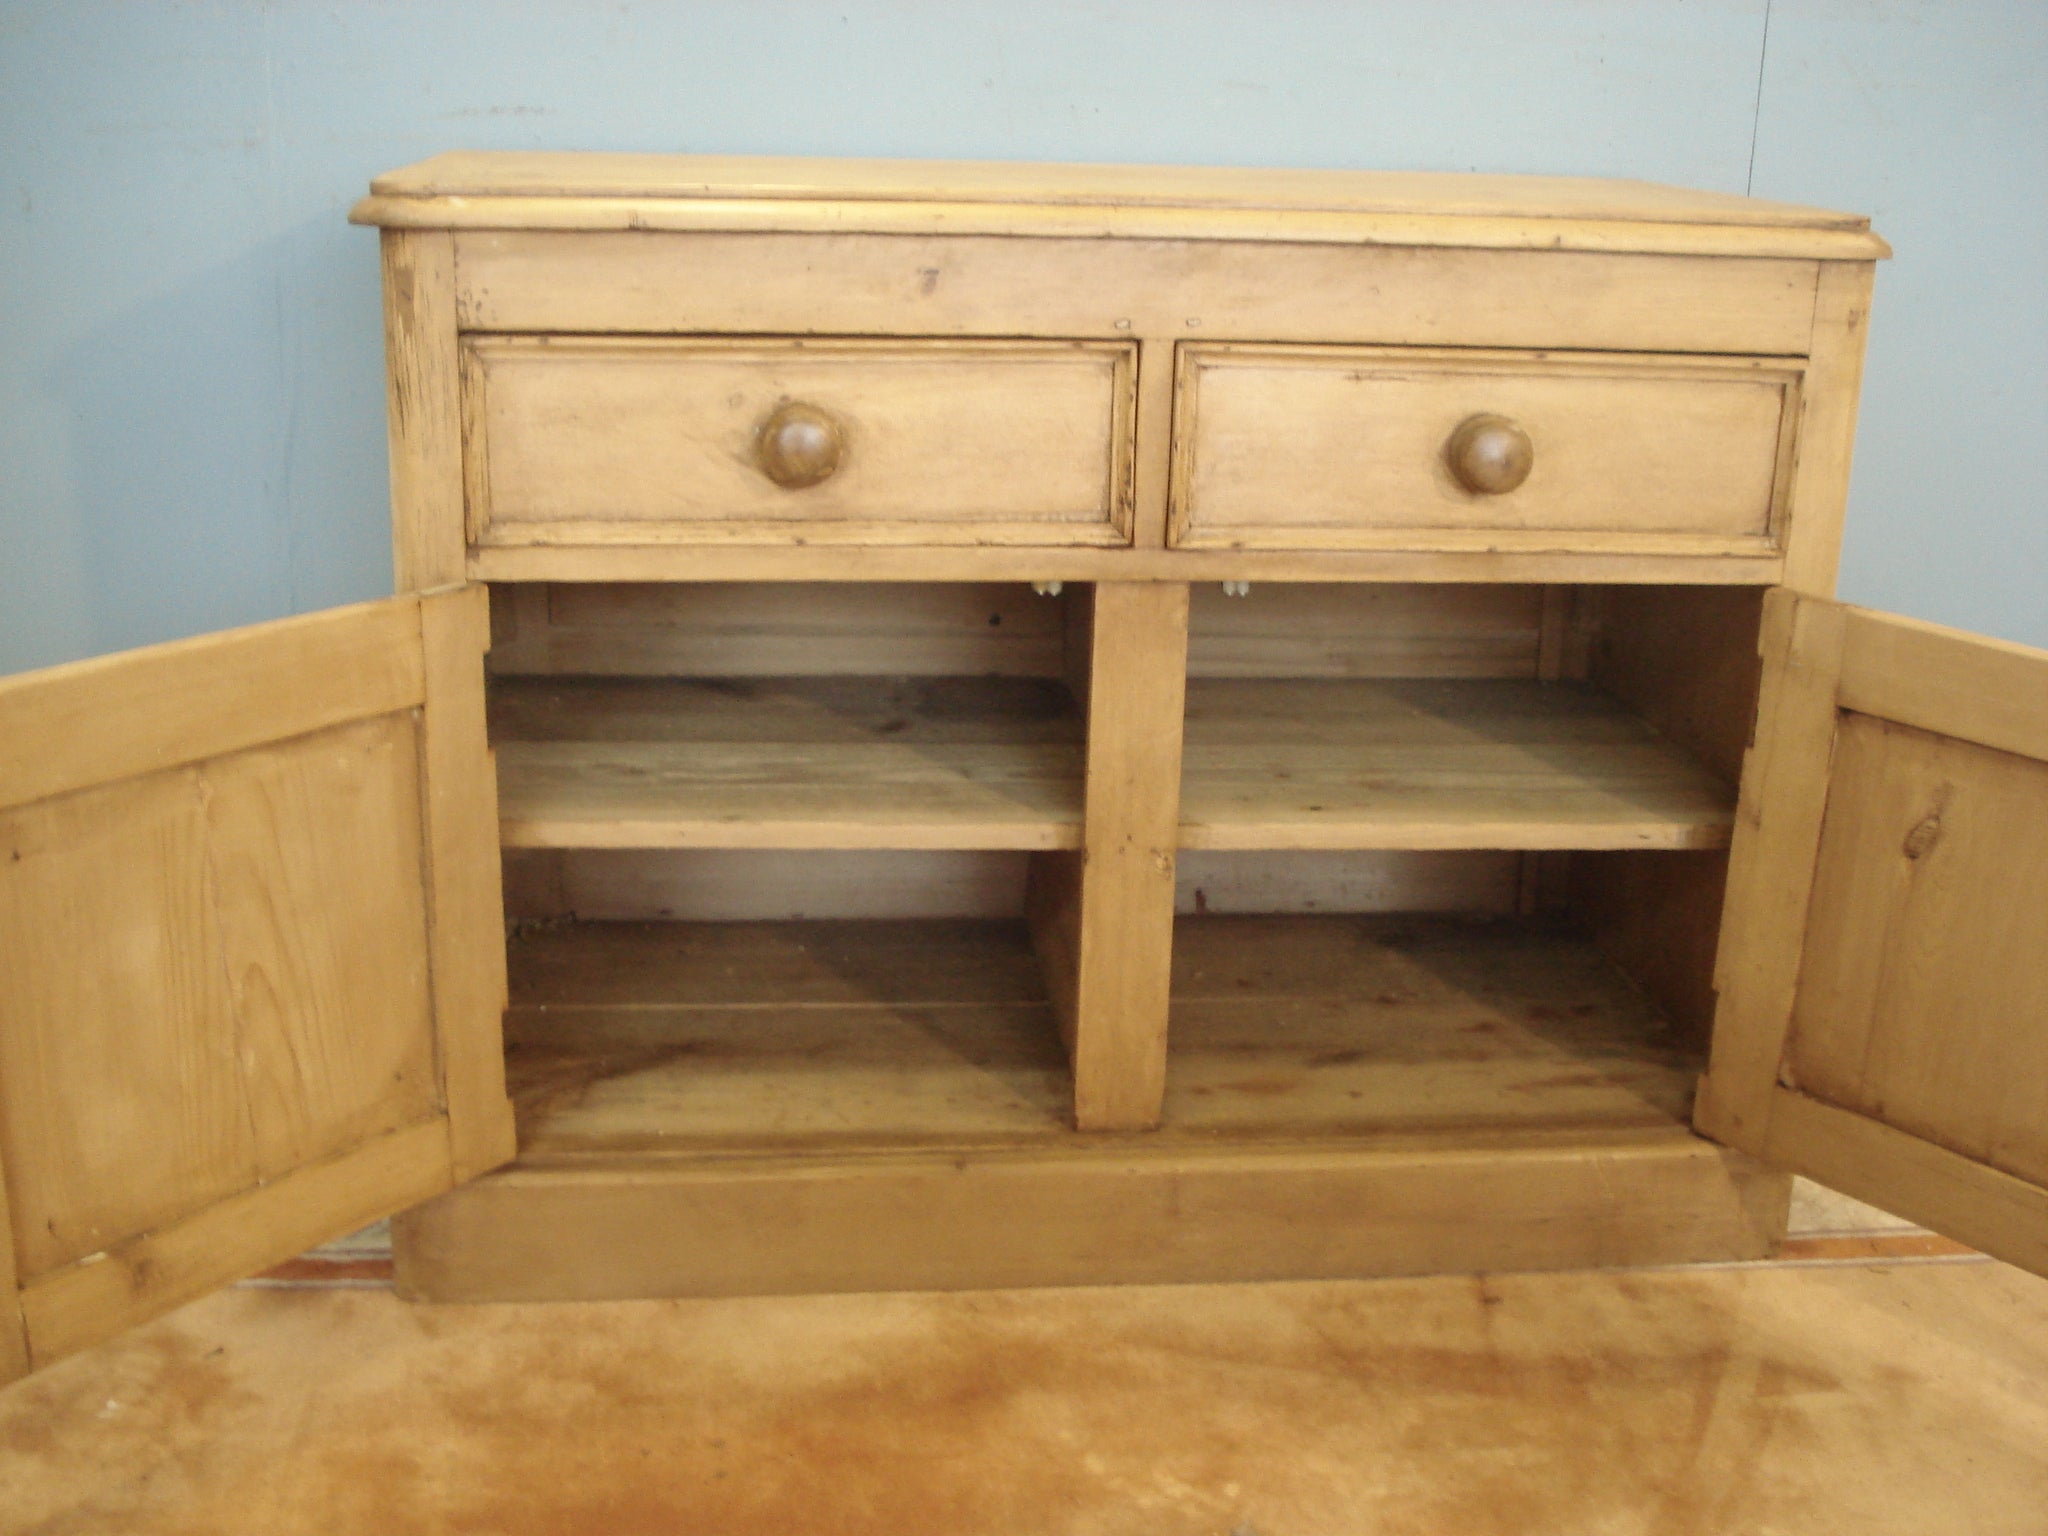 Octagonal panelled doors to this 19th century pine dresser base